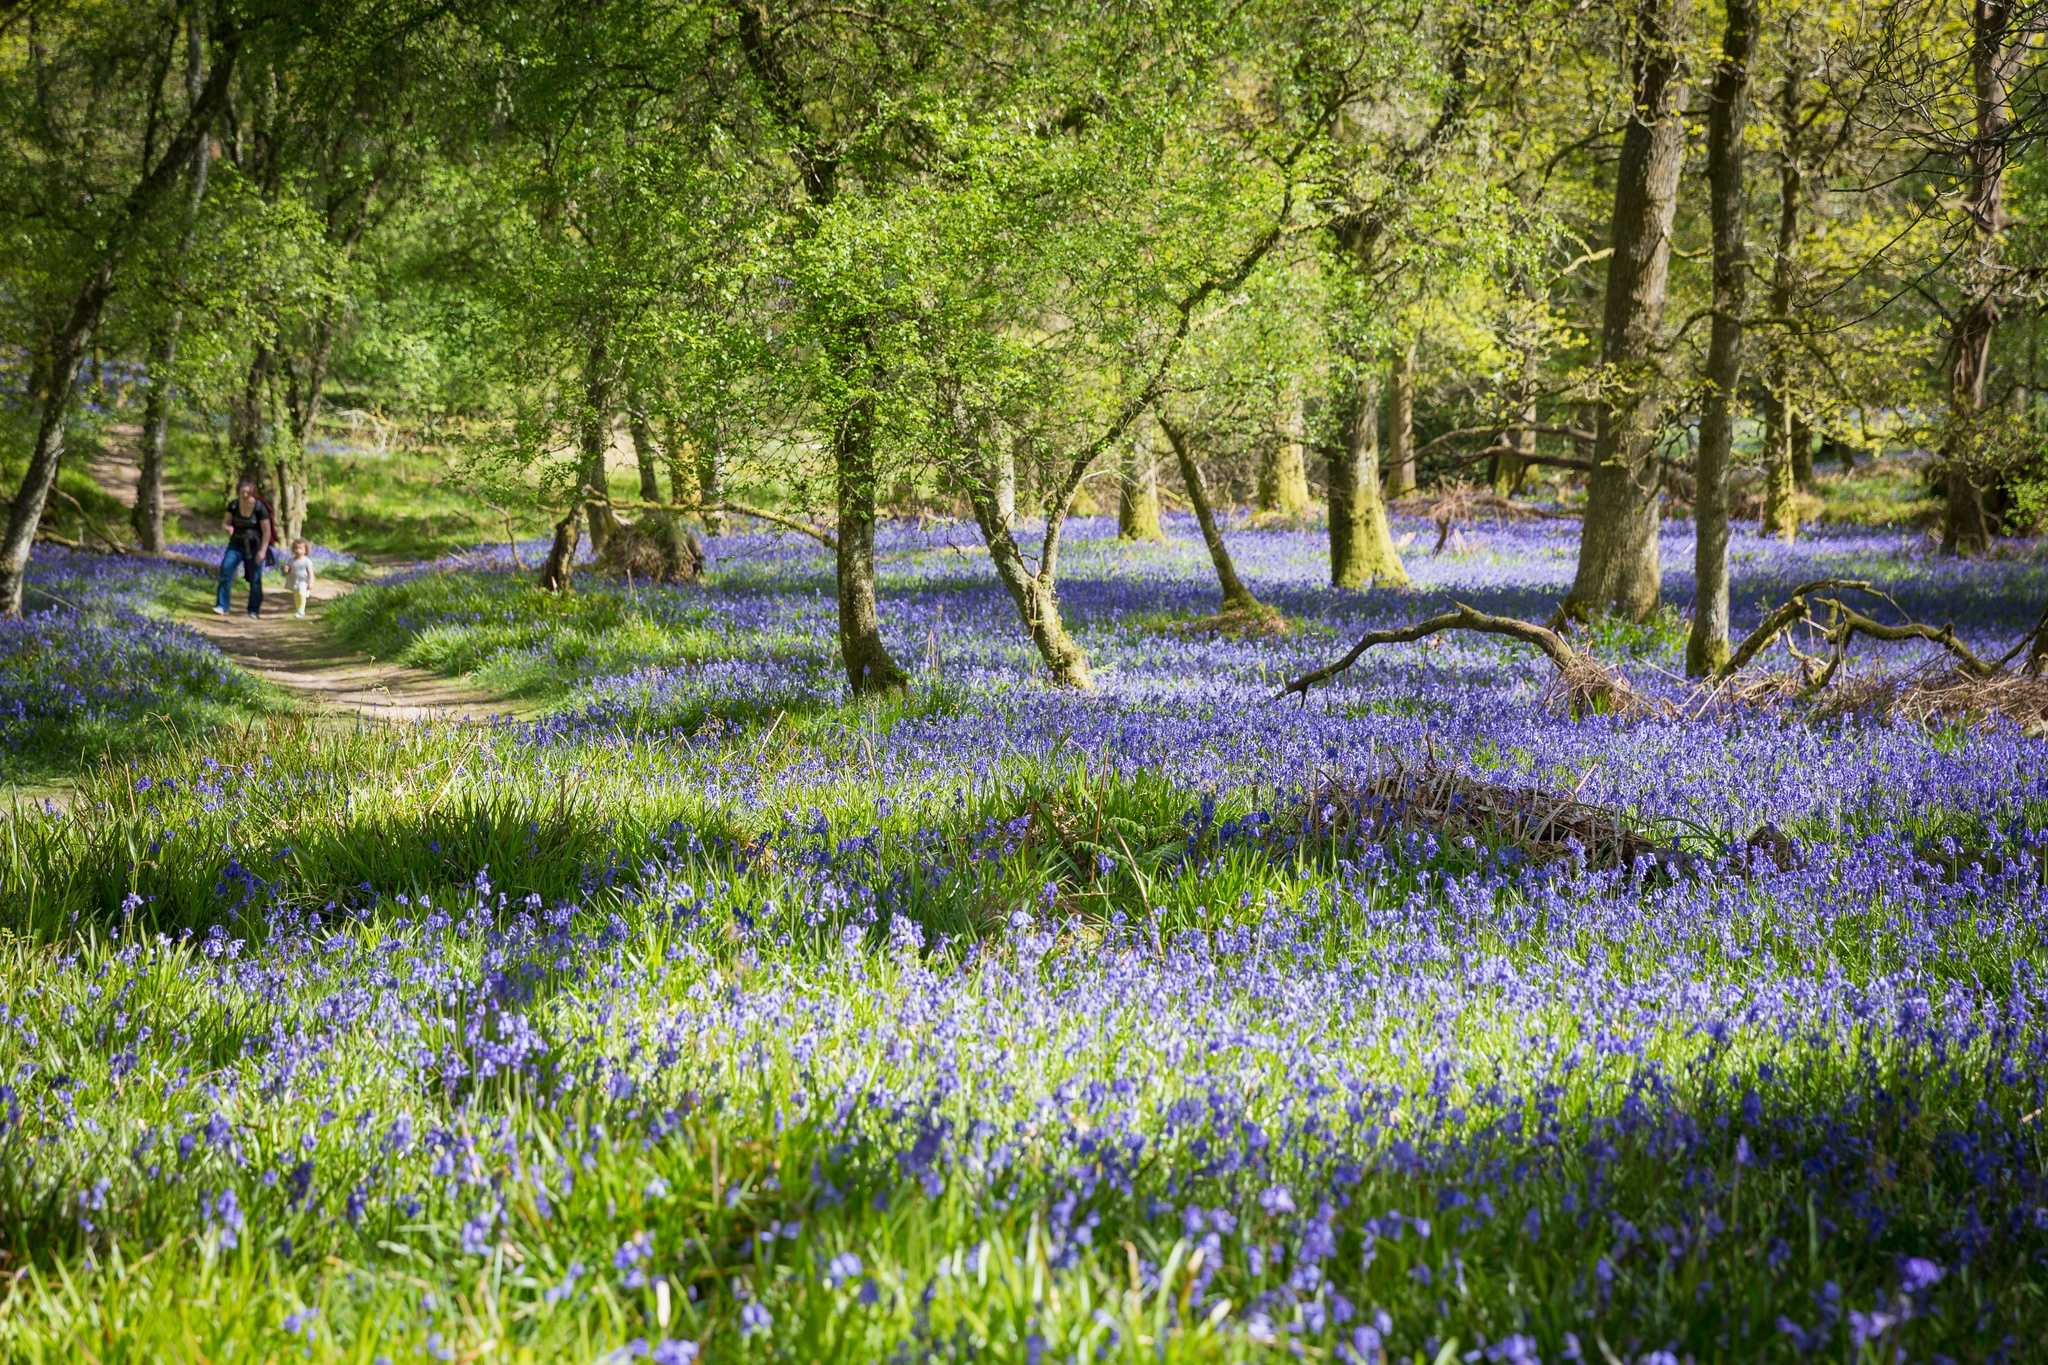 https://www.visitscotland.com/binaries/content/gallery/visitscotland/cms-images/2022/06/22/bluebells-inchcailloch-island